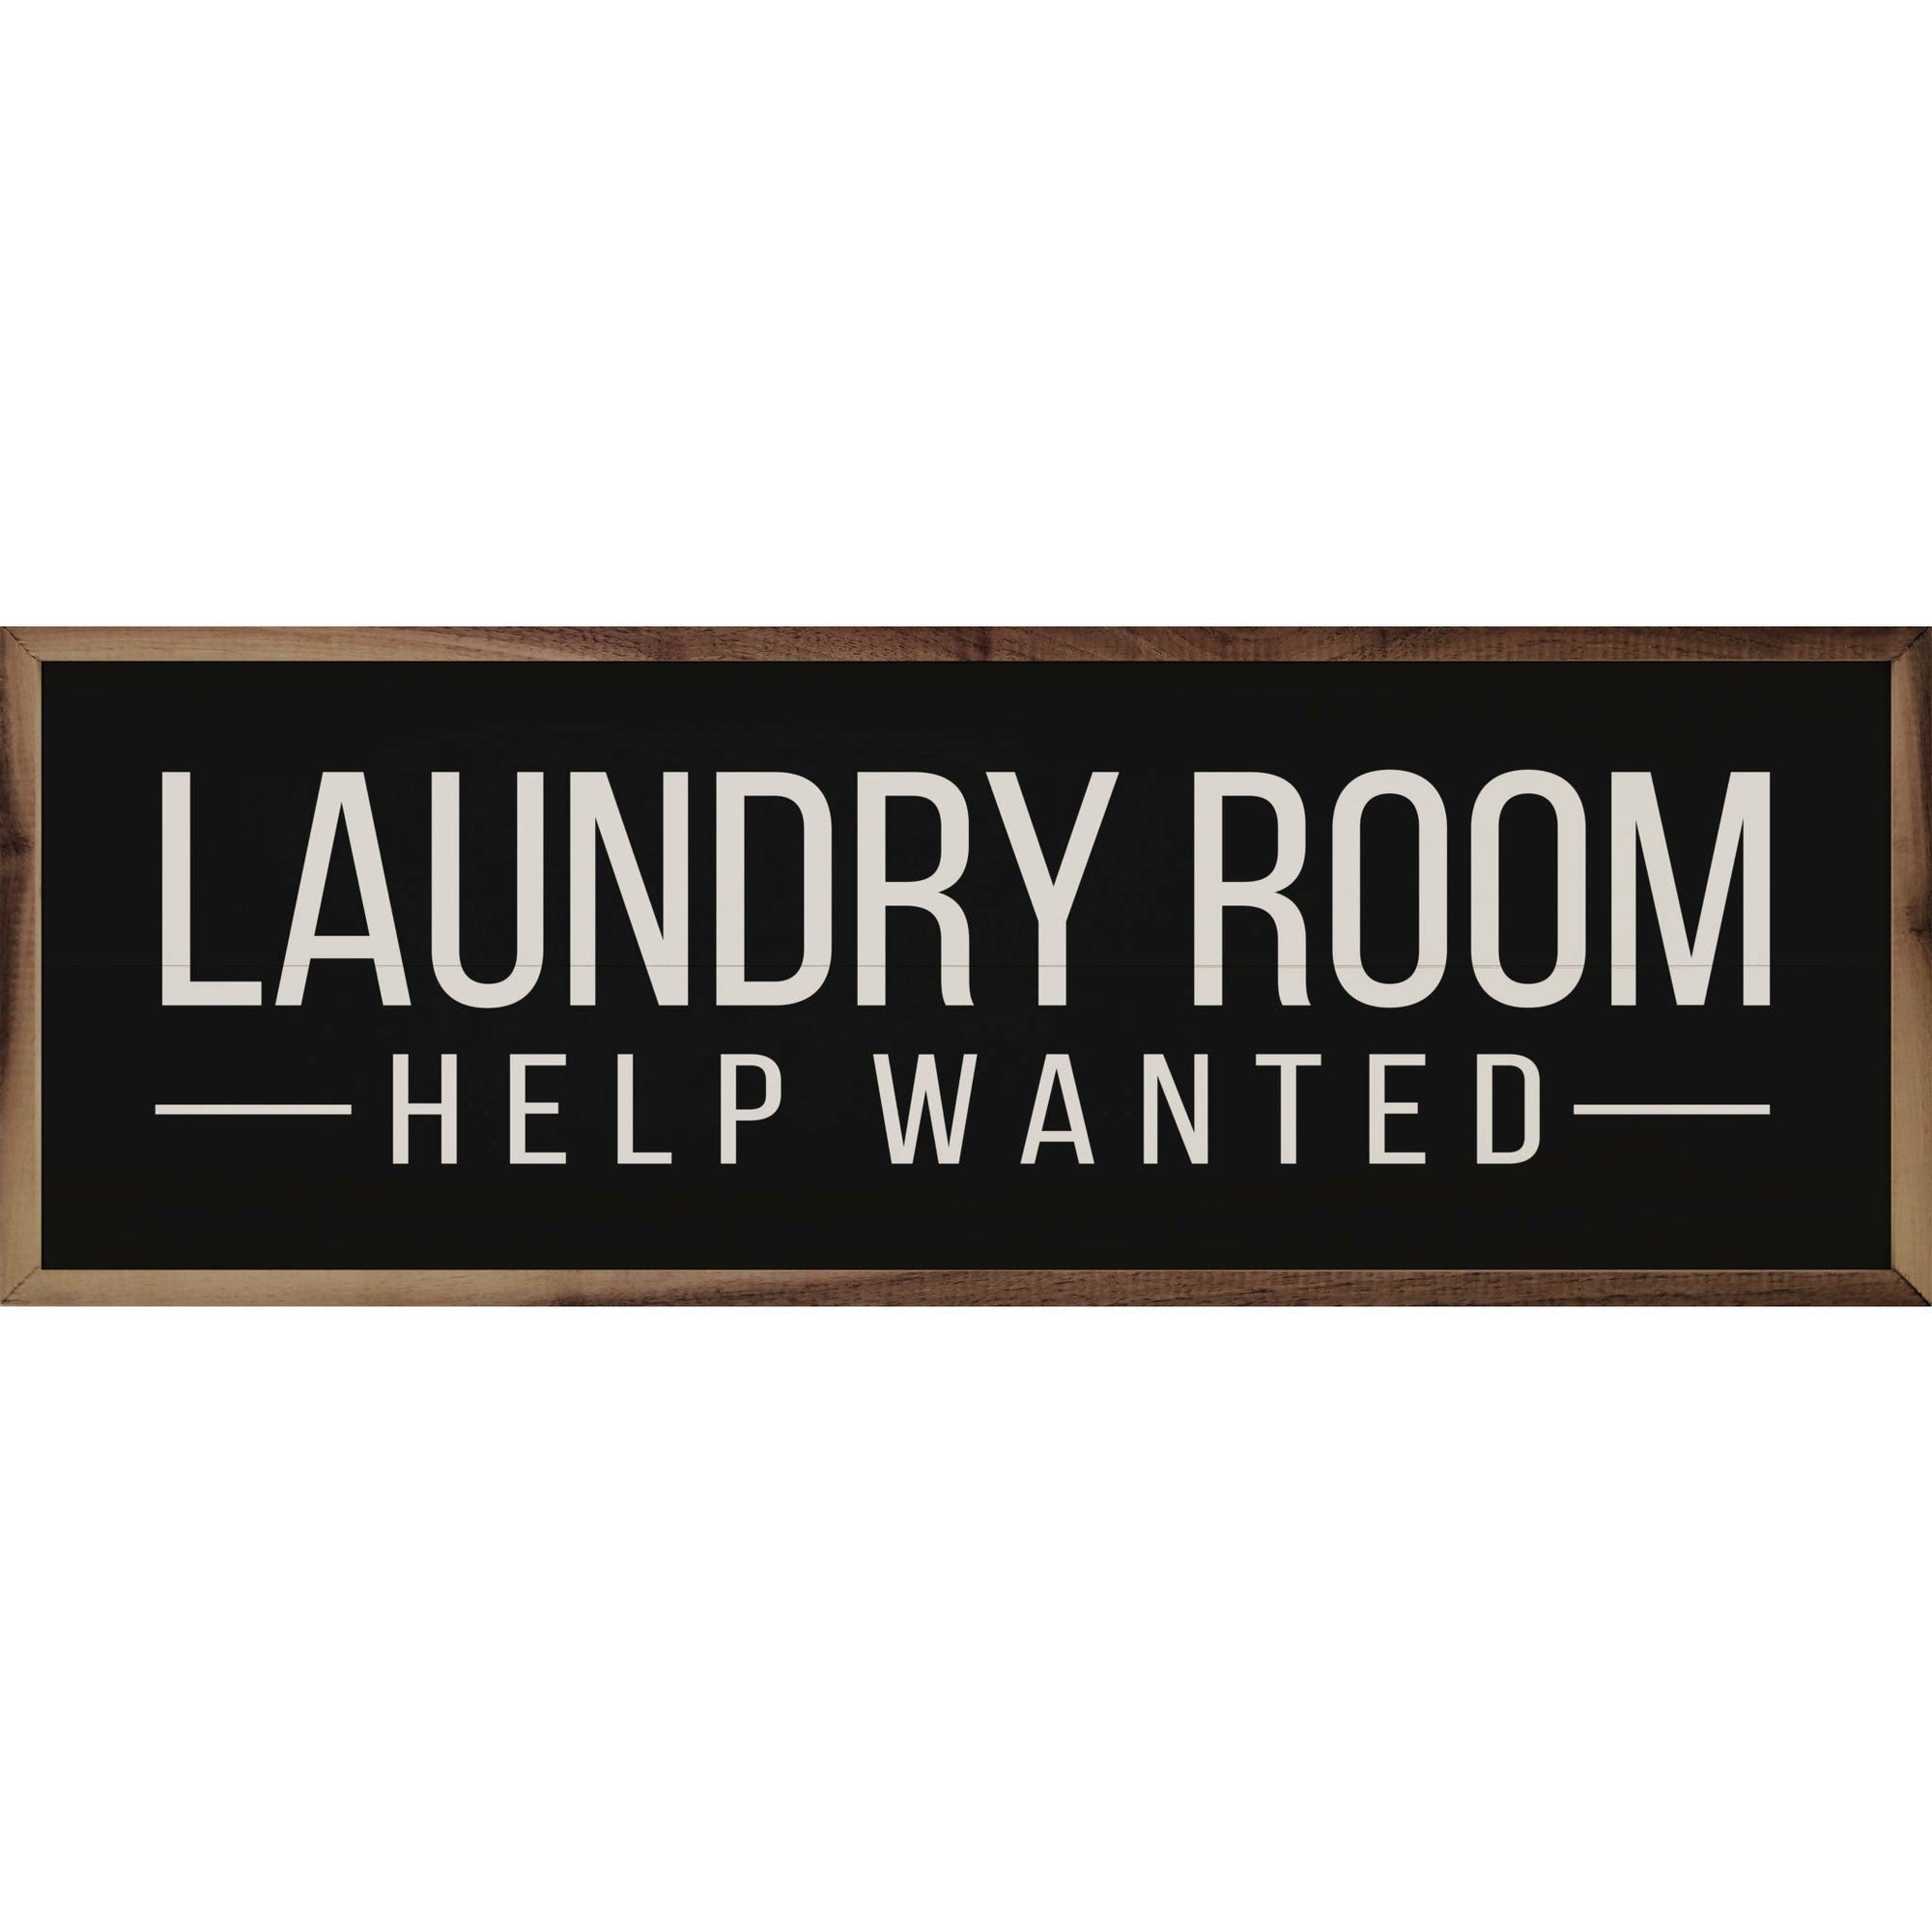 Laundry Room Help Wanted Wood Framed Print